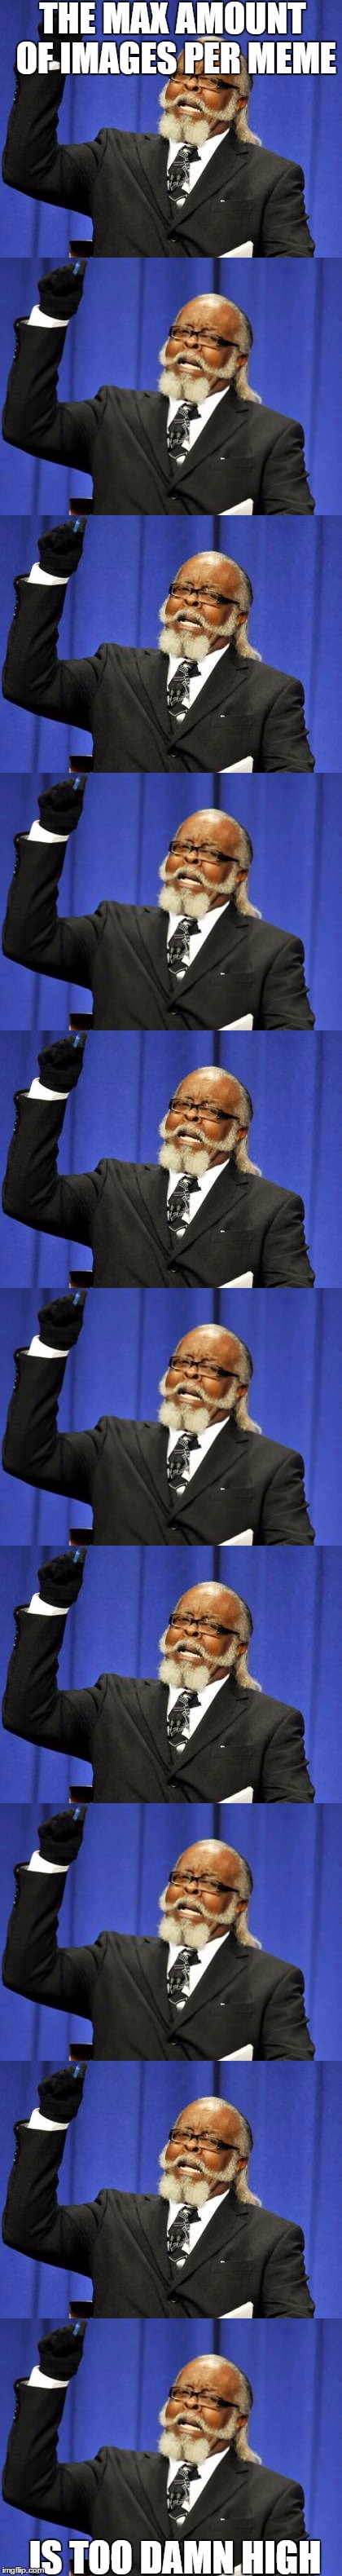 THE MAX AMOUNT OF IMAGES PER MEME; IS TOO DAMN HIGH | image tagged in too damn high | made w/ Imgflip meme maker